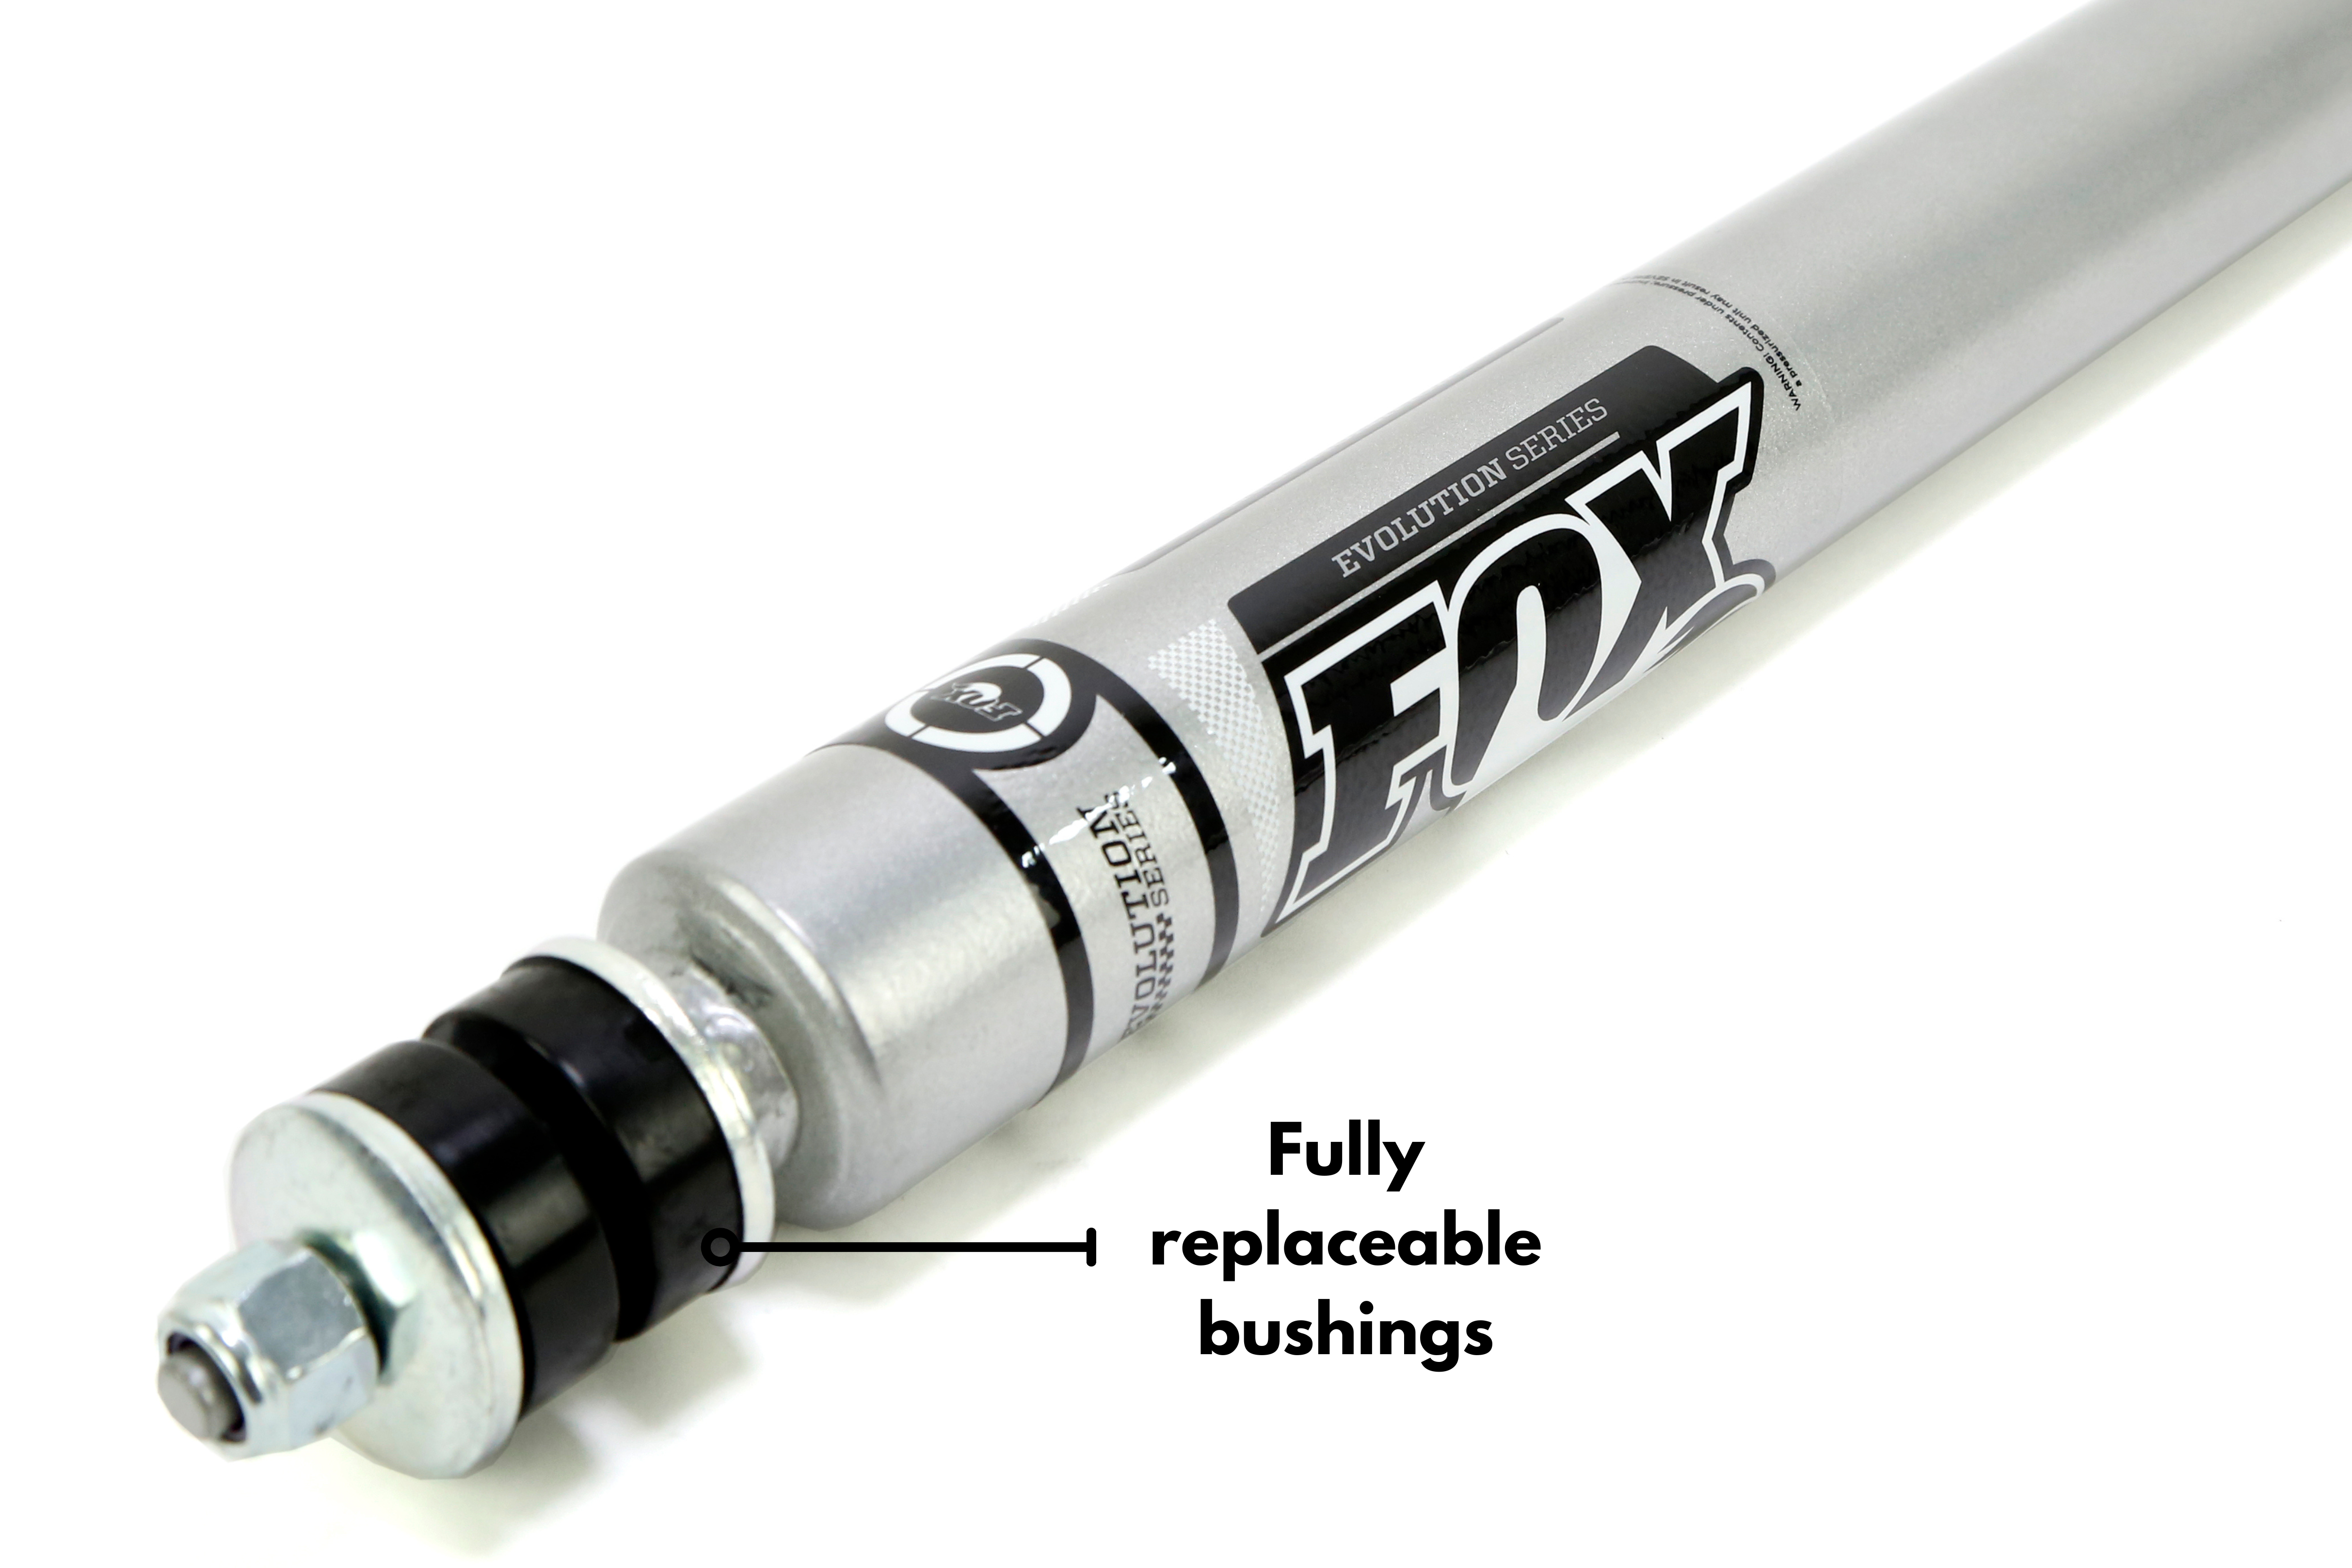 Fox 2.0 shocks offer fully replaceable bushings, allowing users to extend their shocks' lifetime